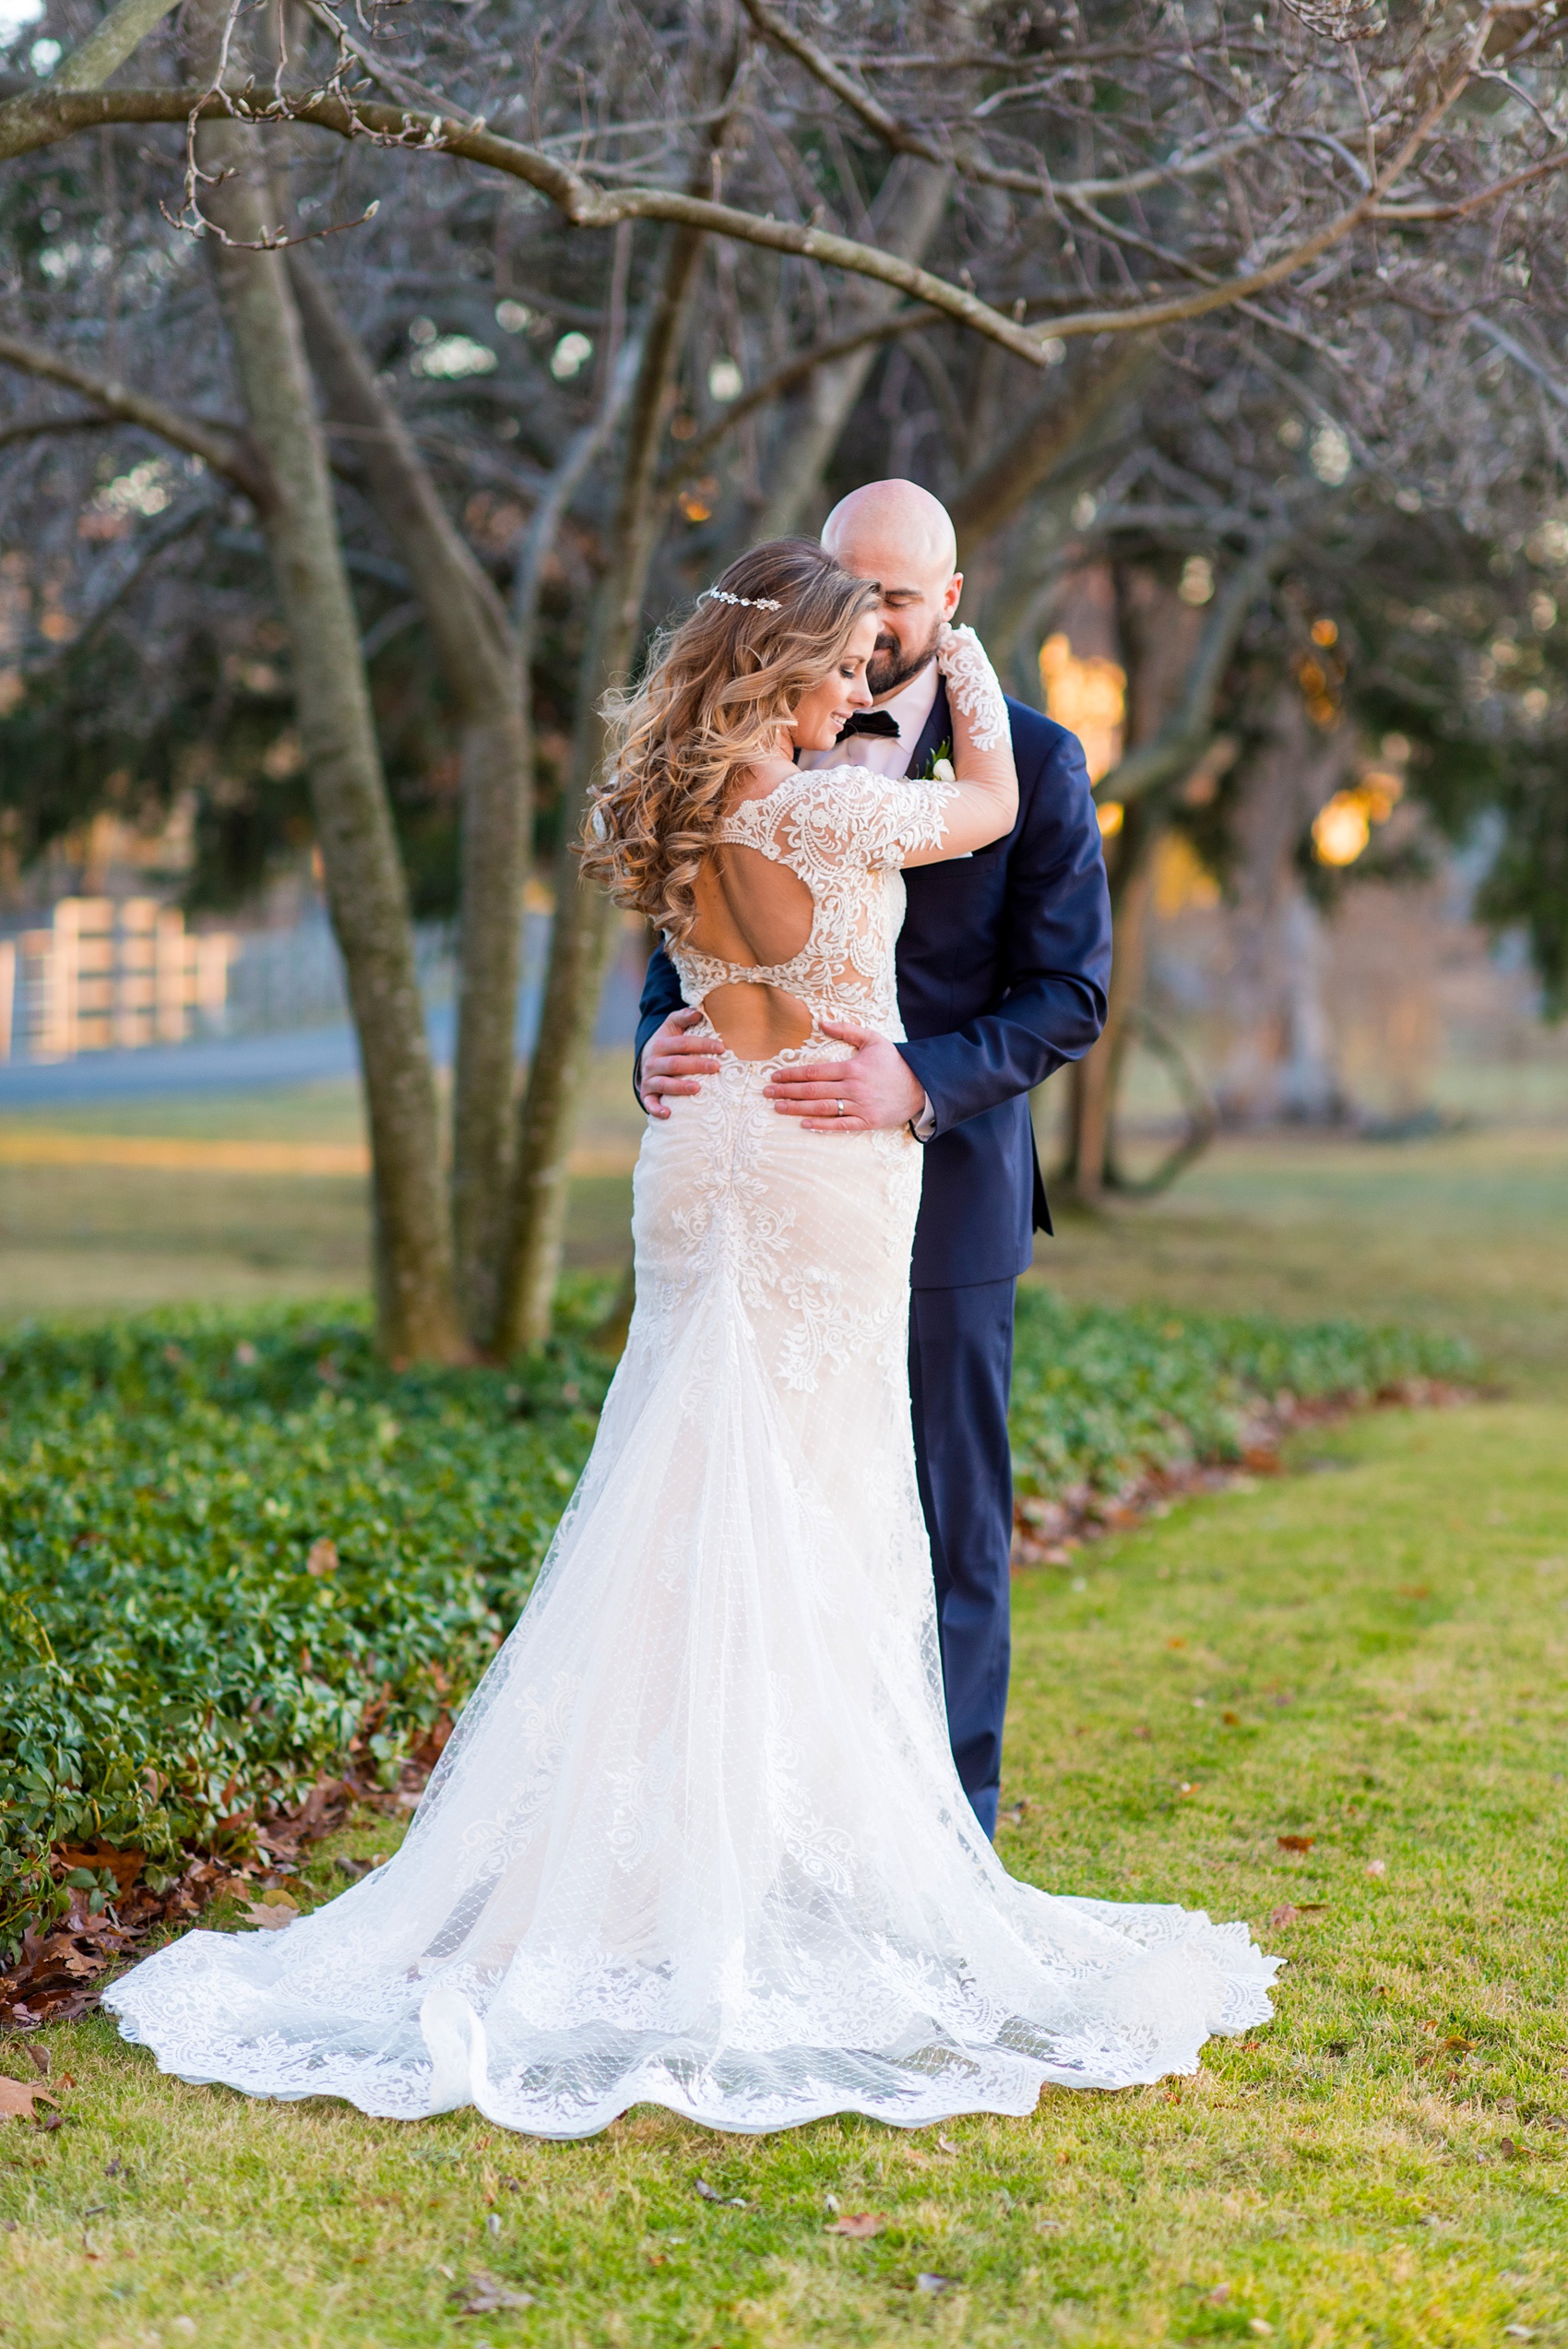 Wedding photos at Sleepy Hollow Country Club for a winter reception in January by Mikkel Paige Photography. A picture of the bride in her long sleeve, lace gown and groom in his navy blue tuxedo, during their portraits.